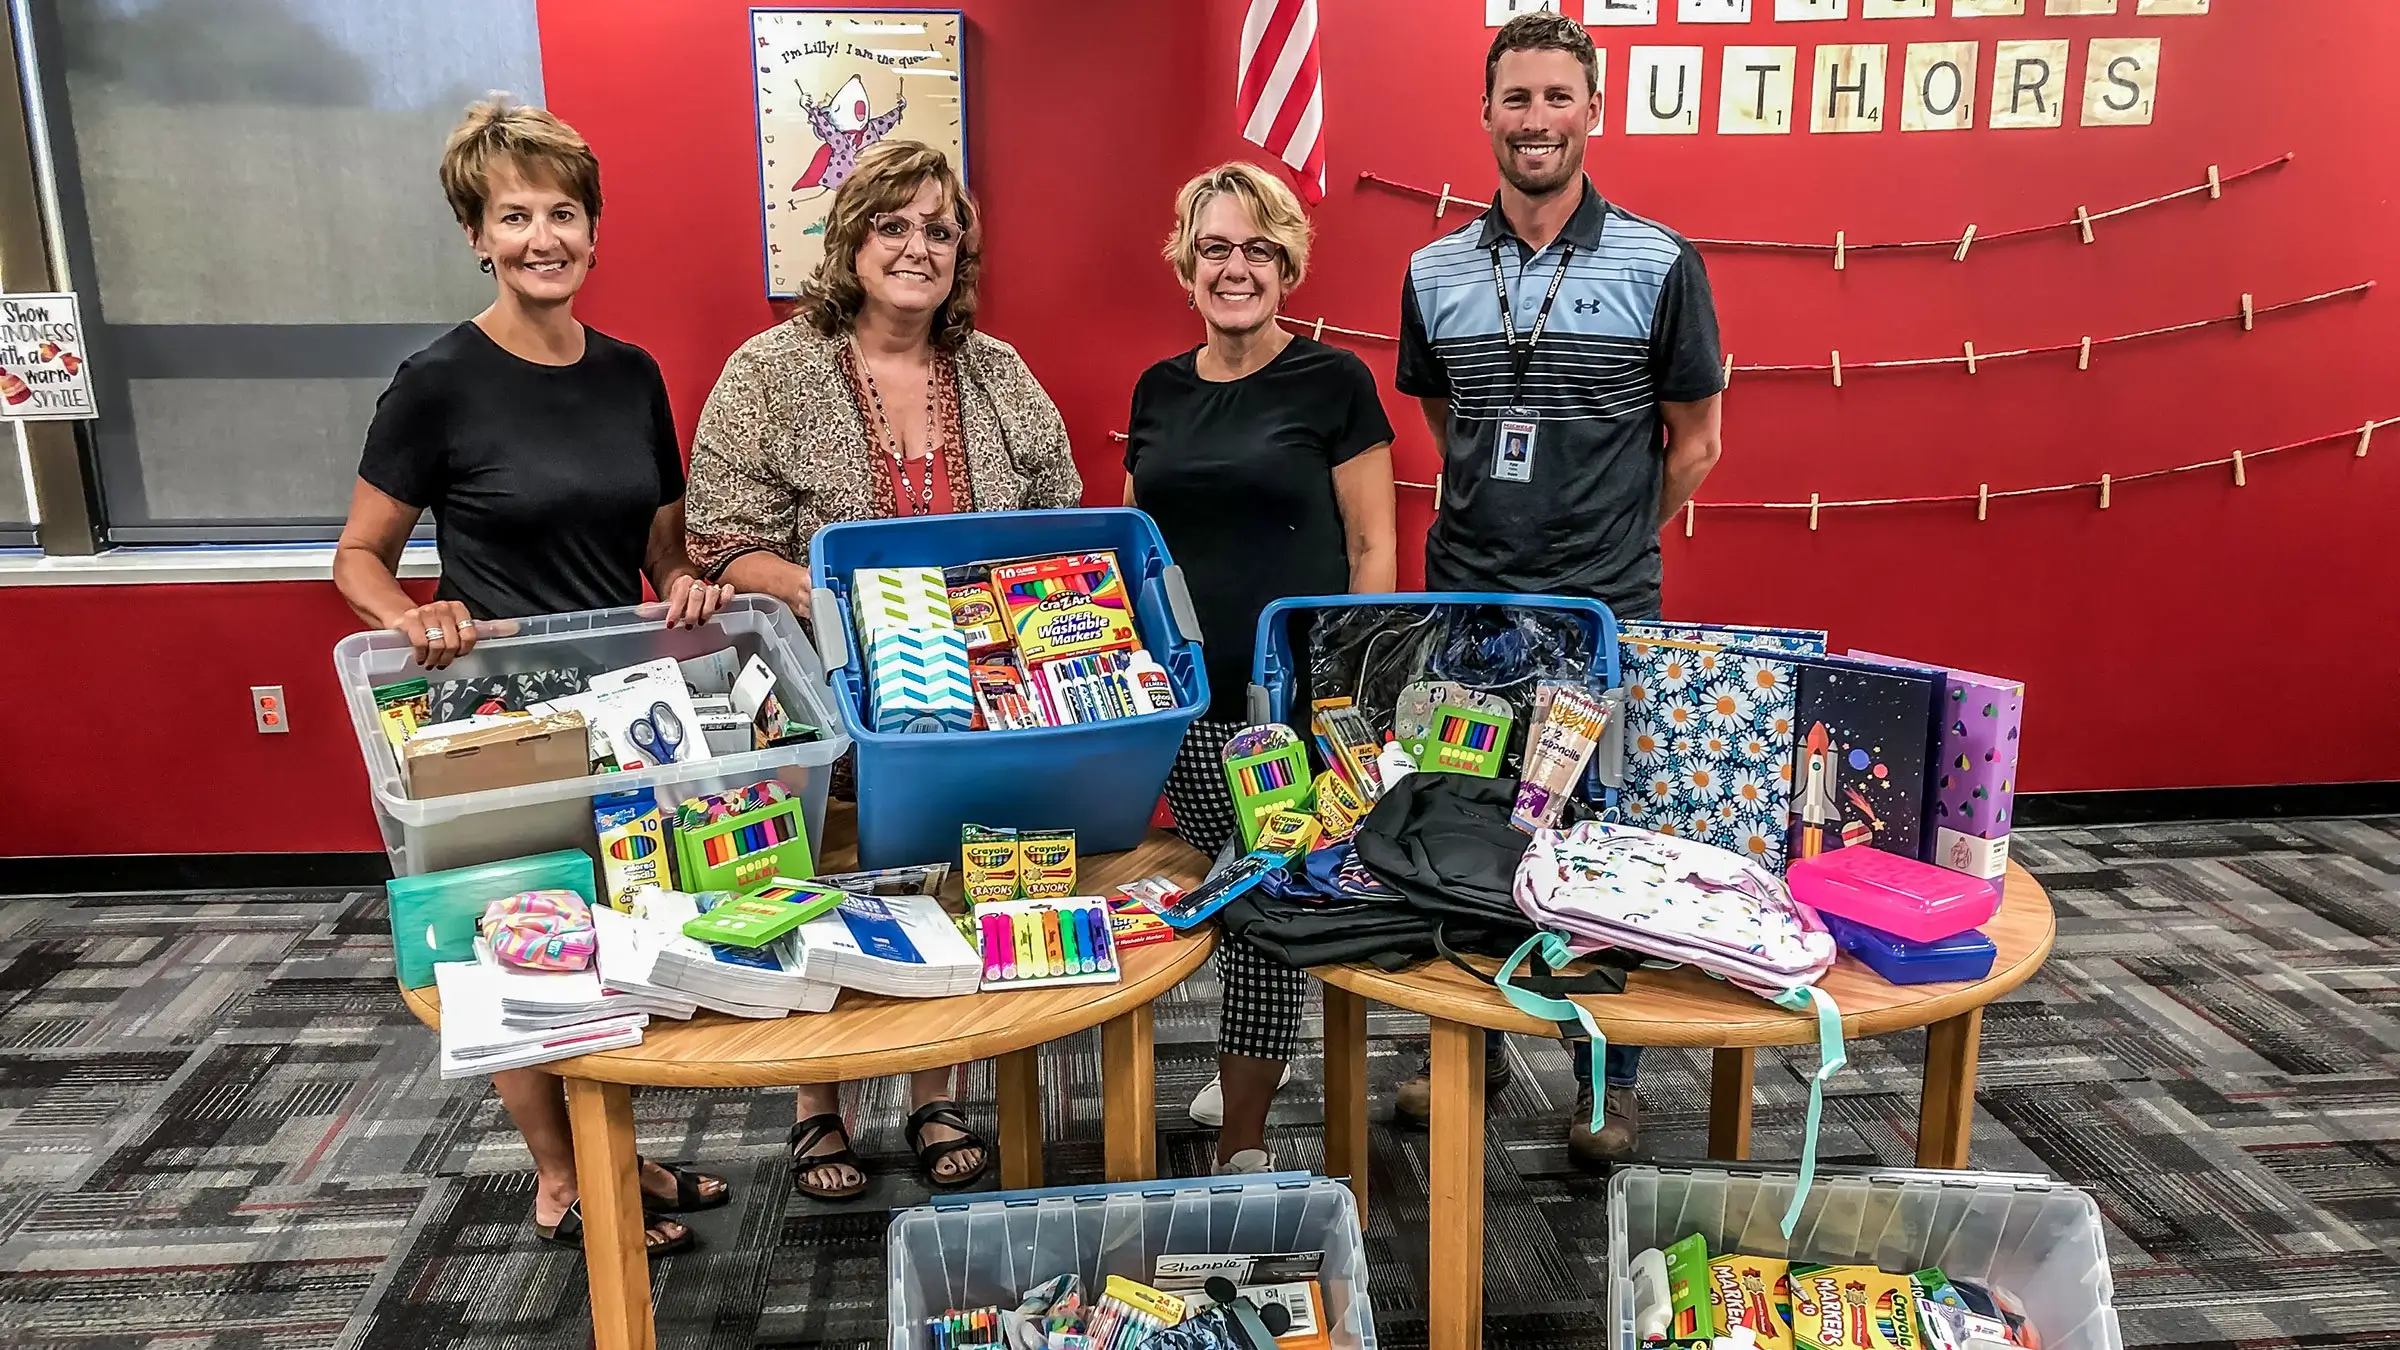 Employees show off items collected for the School Supply Drive.